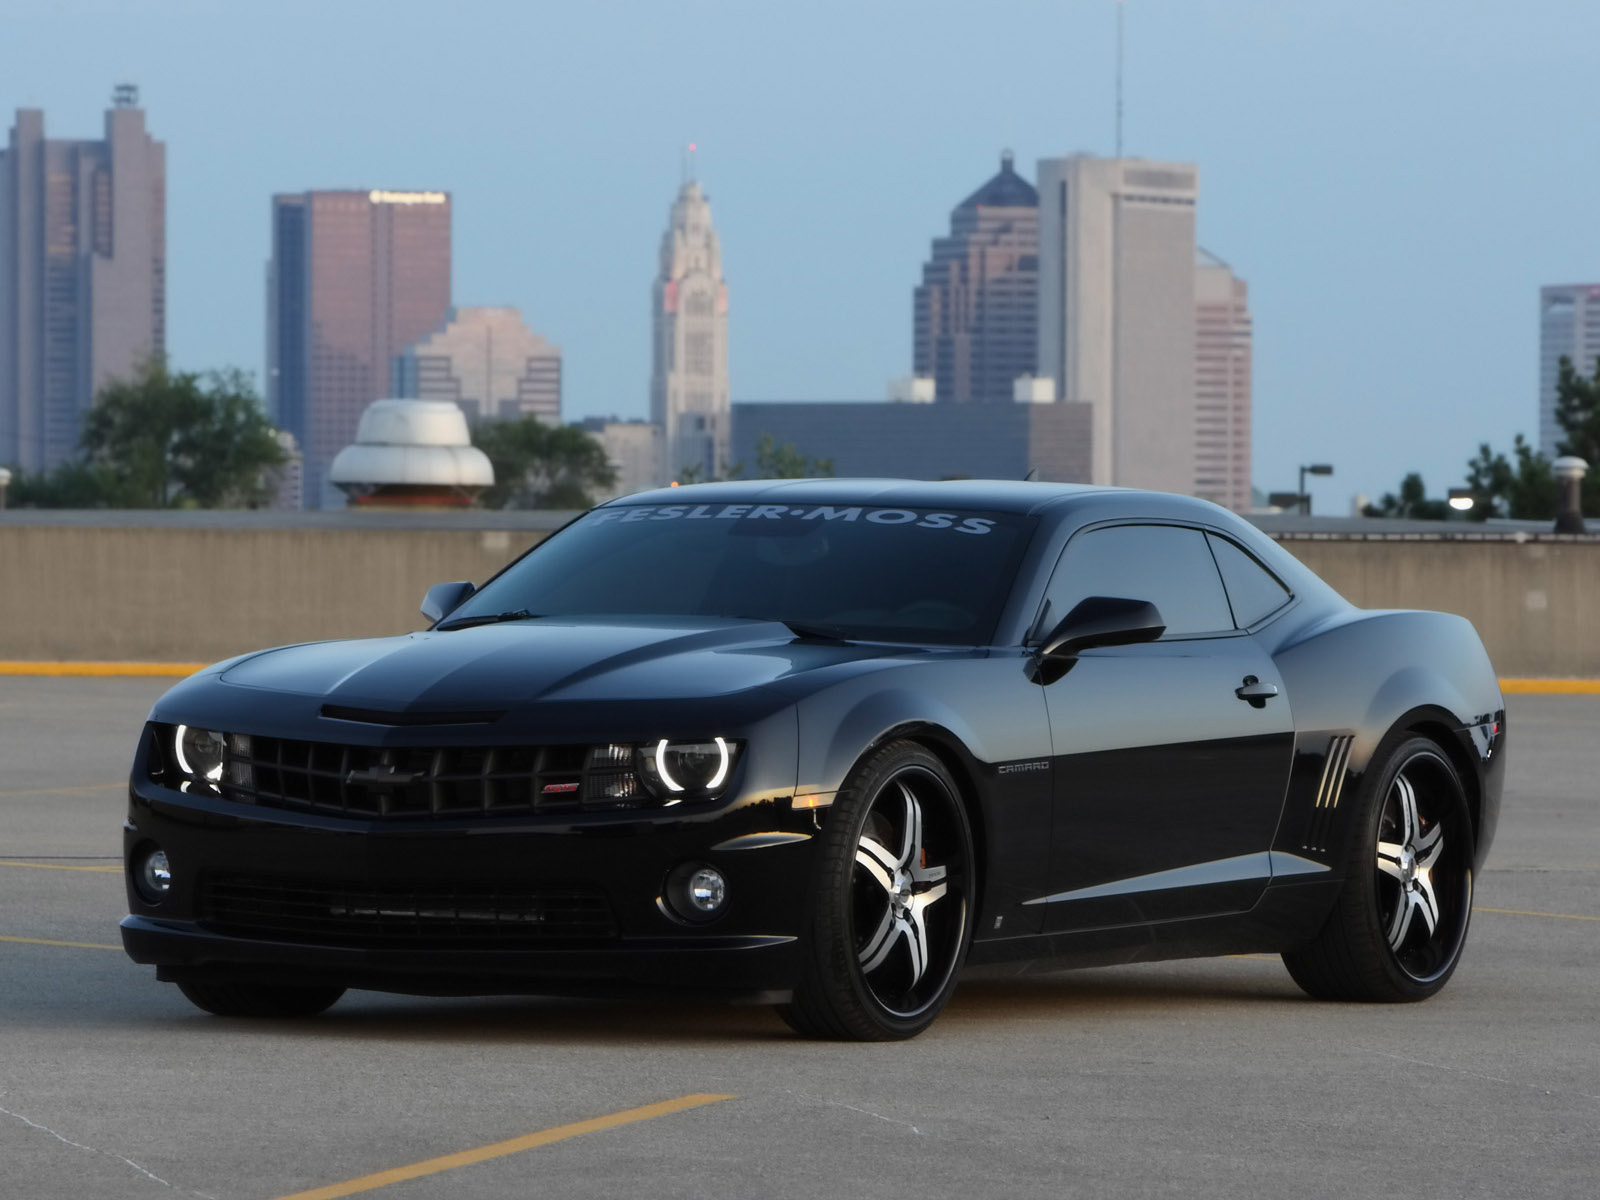 2010, Chevrolet, Camaro, Competition, Muscle, Supercar, Supercars Wallpaper